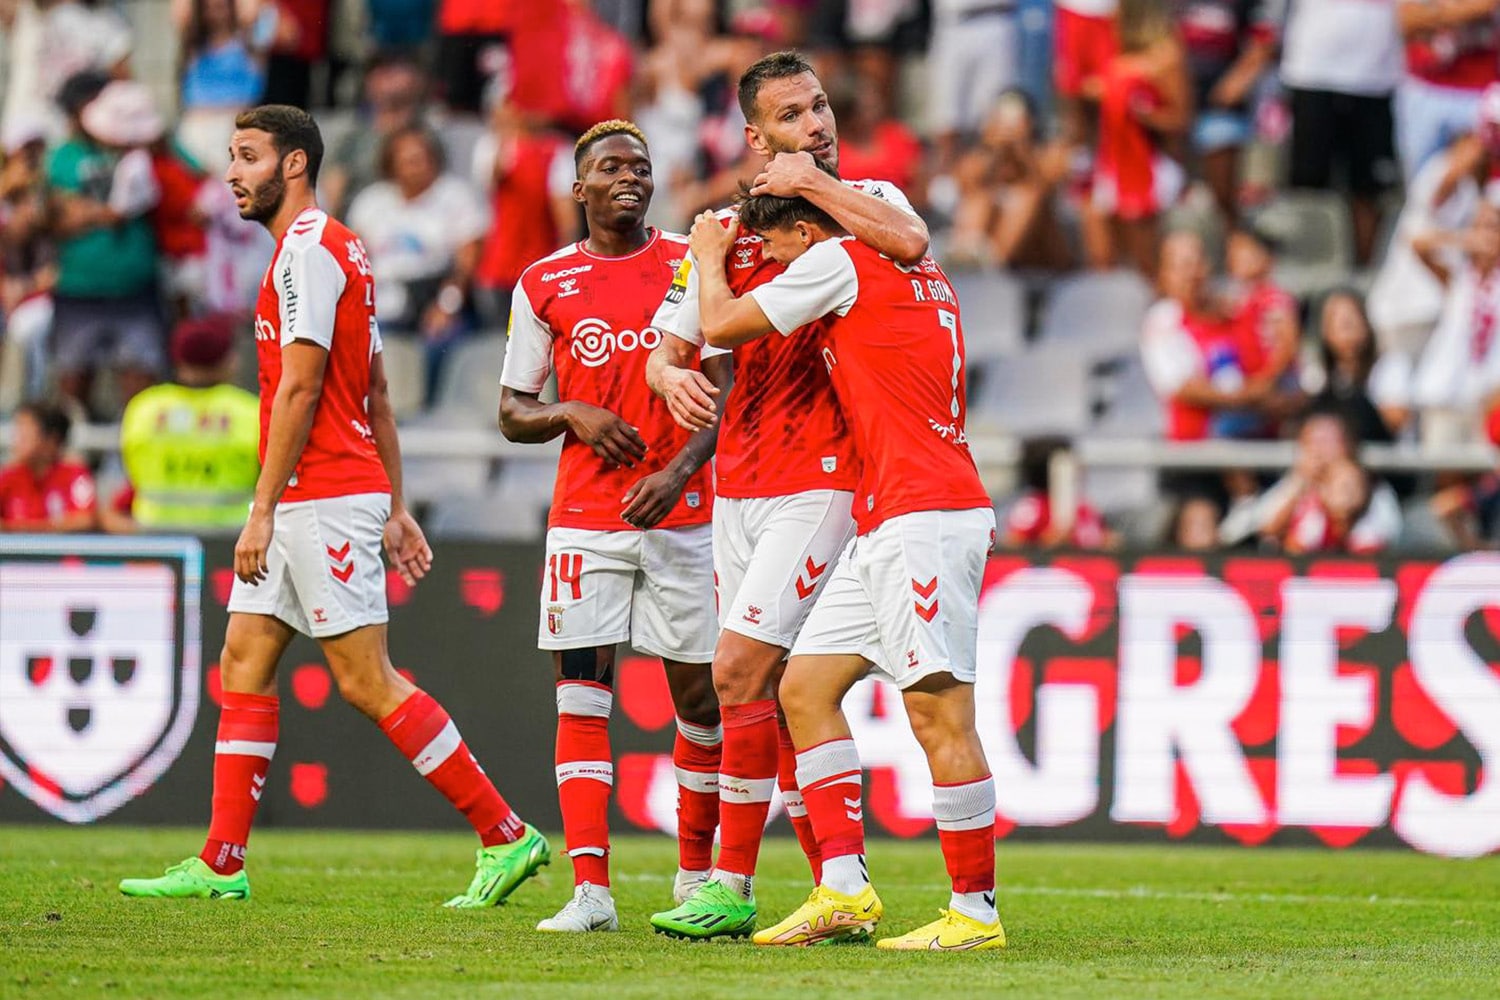 PSG Owner Adds SC Braga to Soccer Lineup